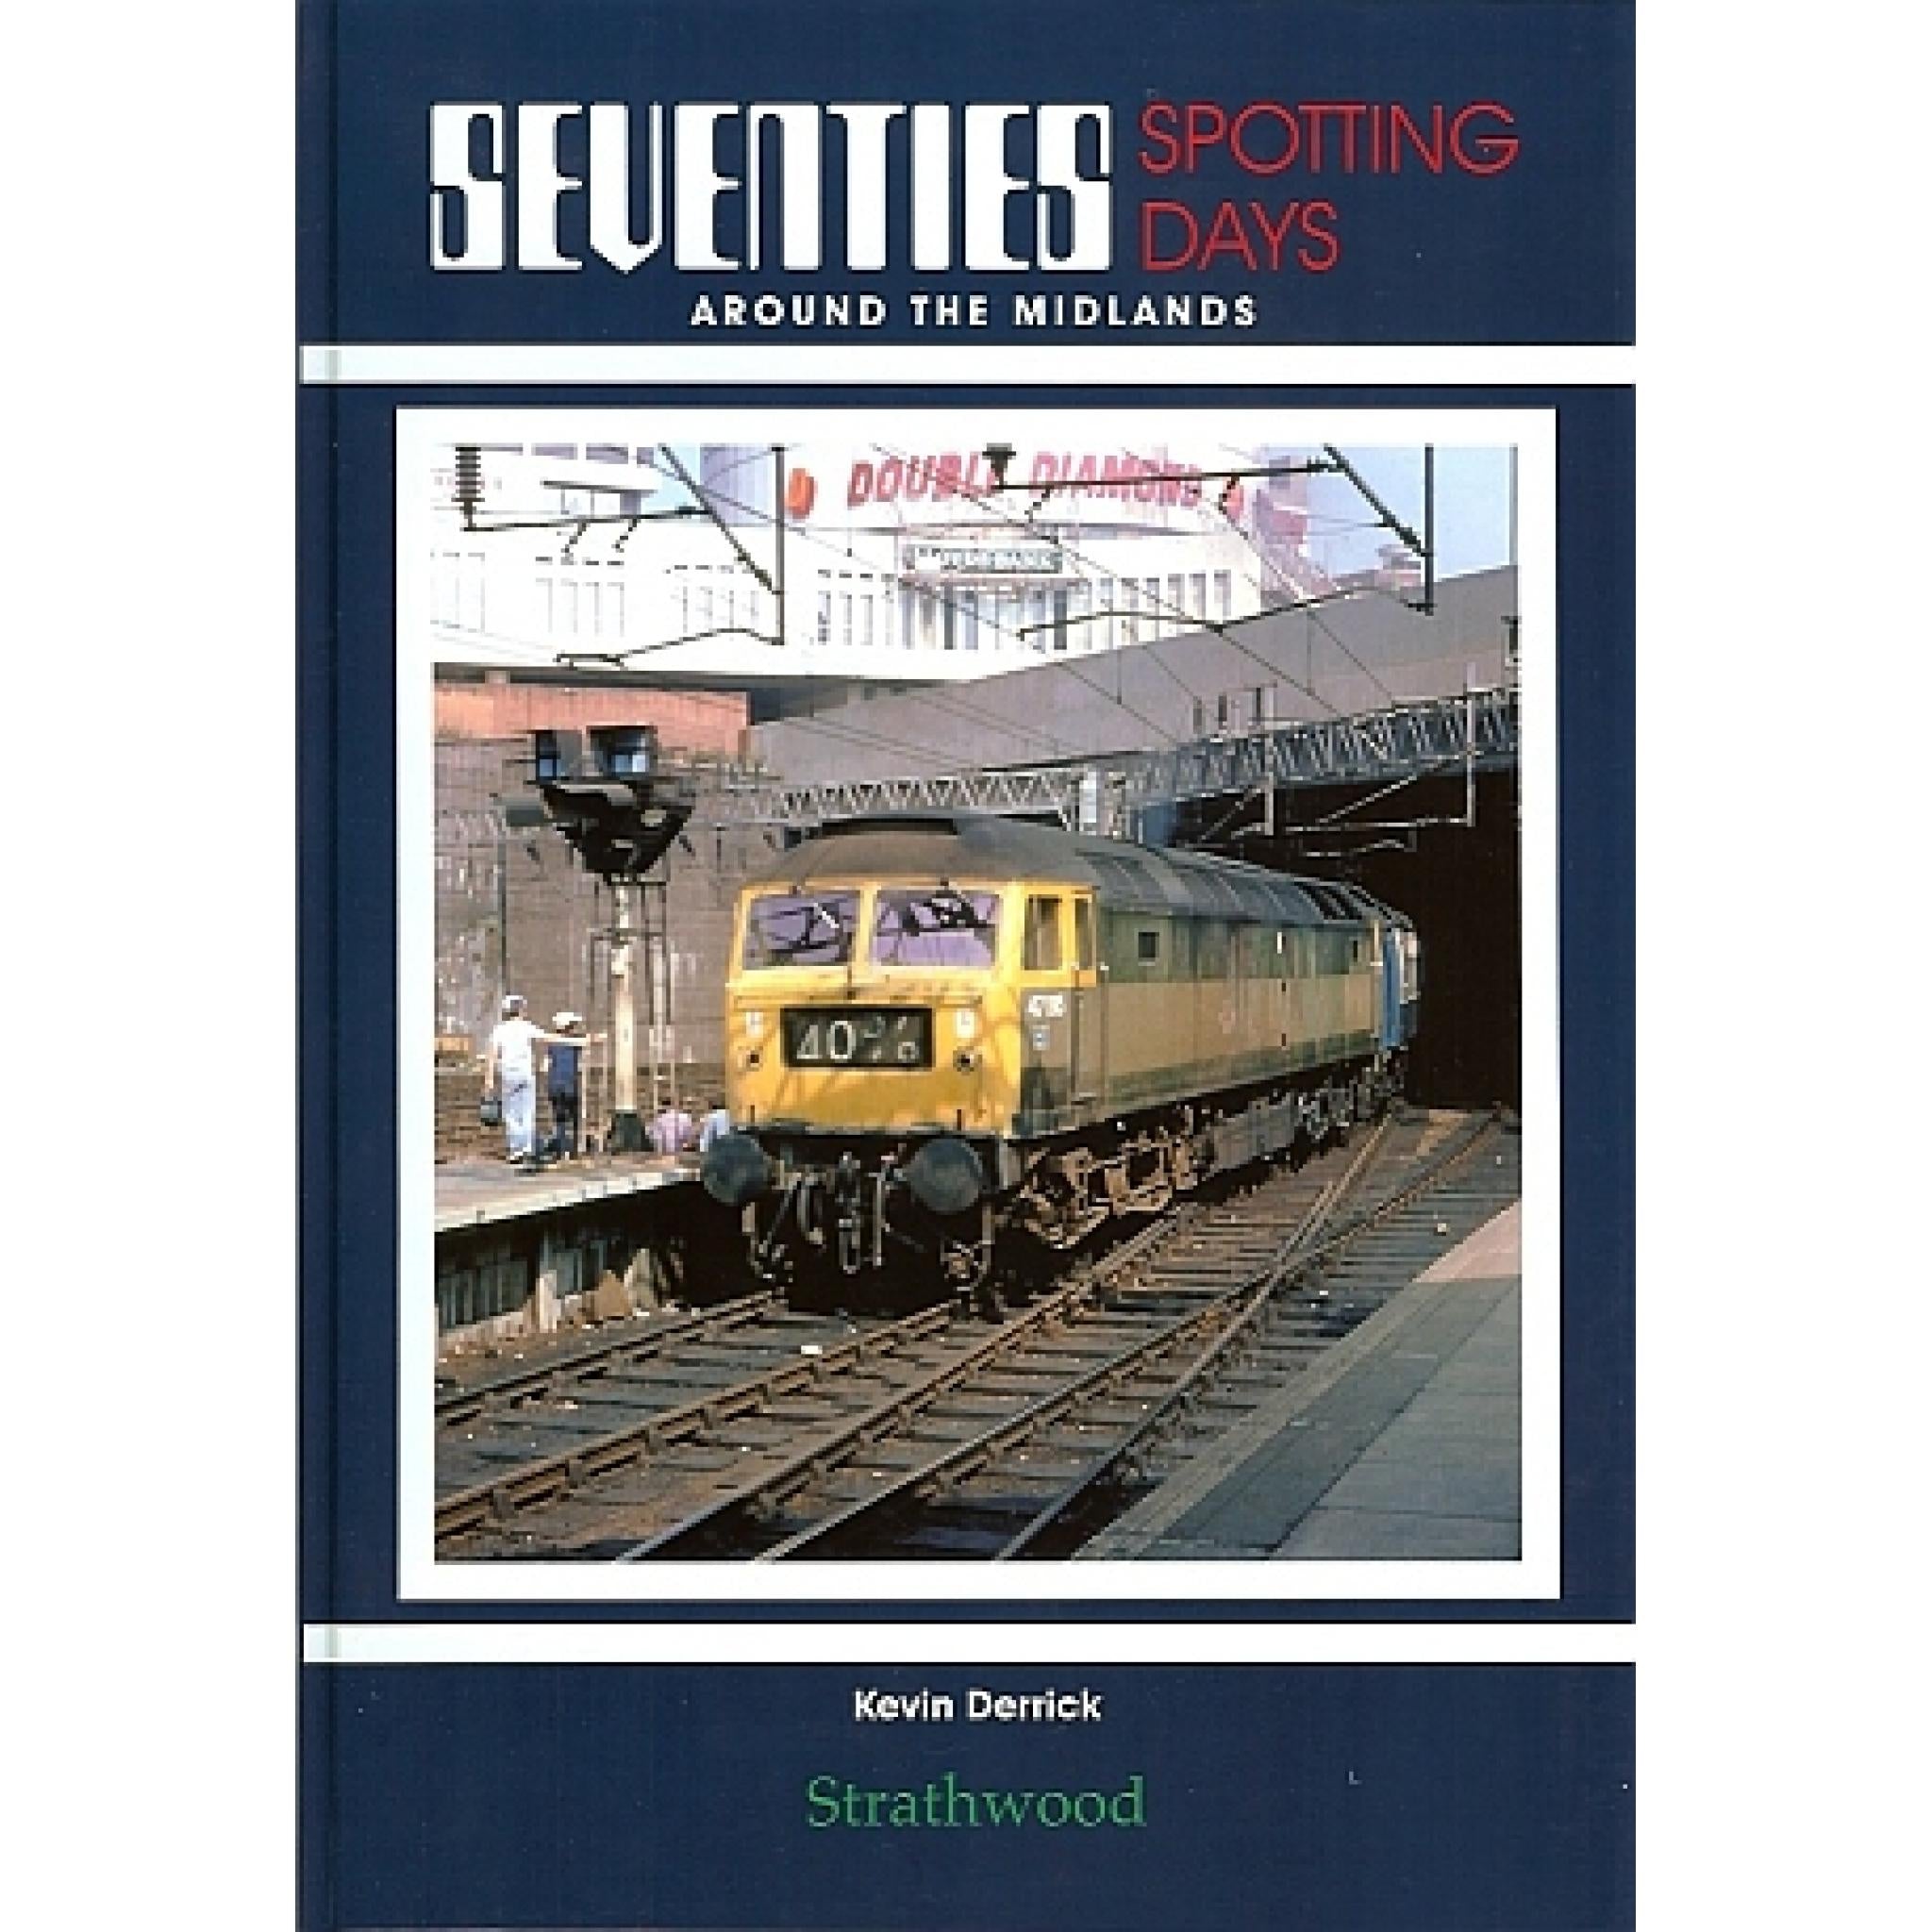 50%+ OFF RRP is £19.95  Seventies Spotting Days around the Midlands